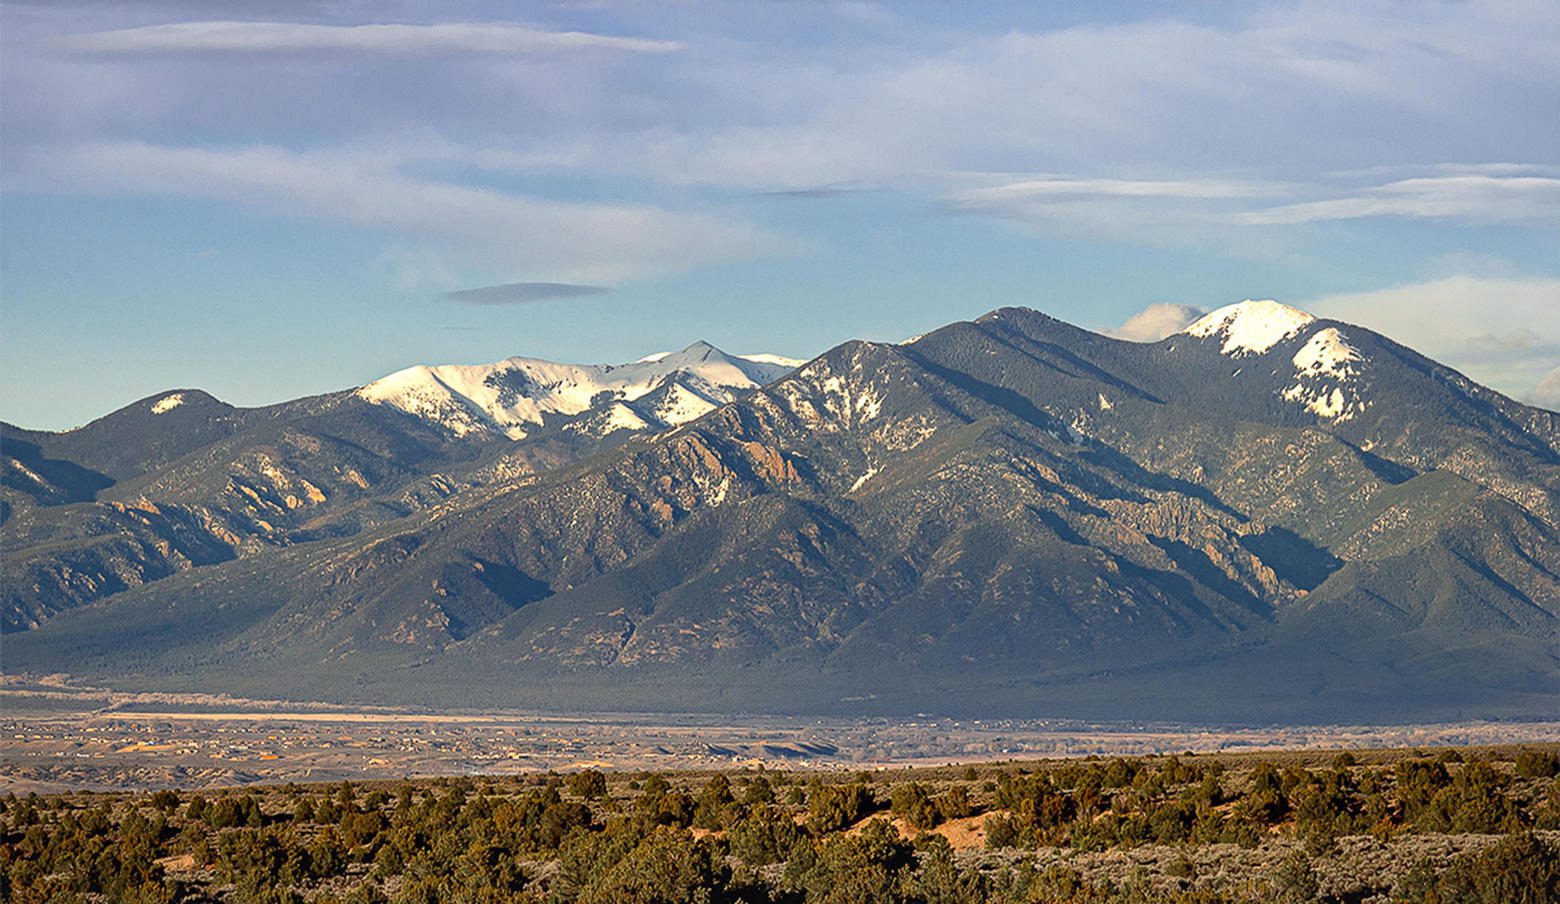 Mountains in New Mexico's highland